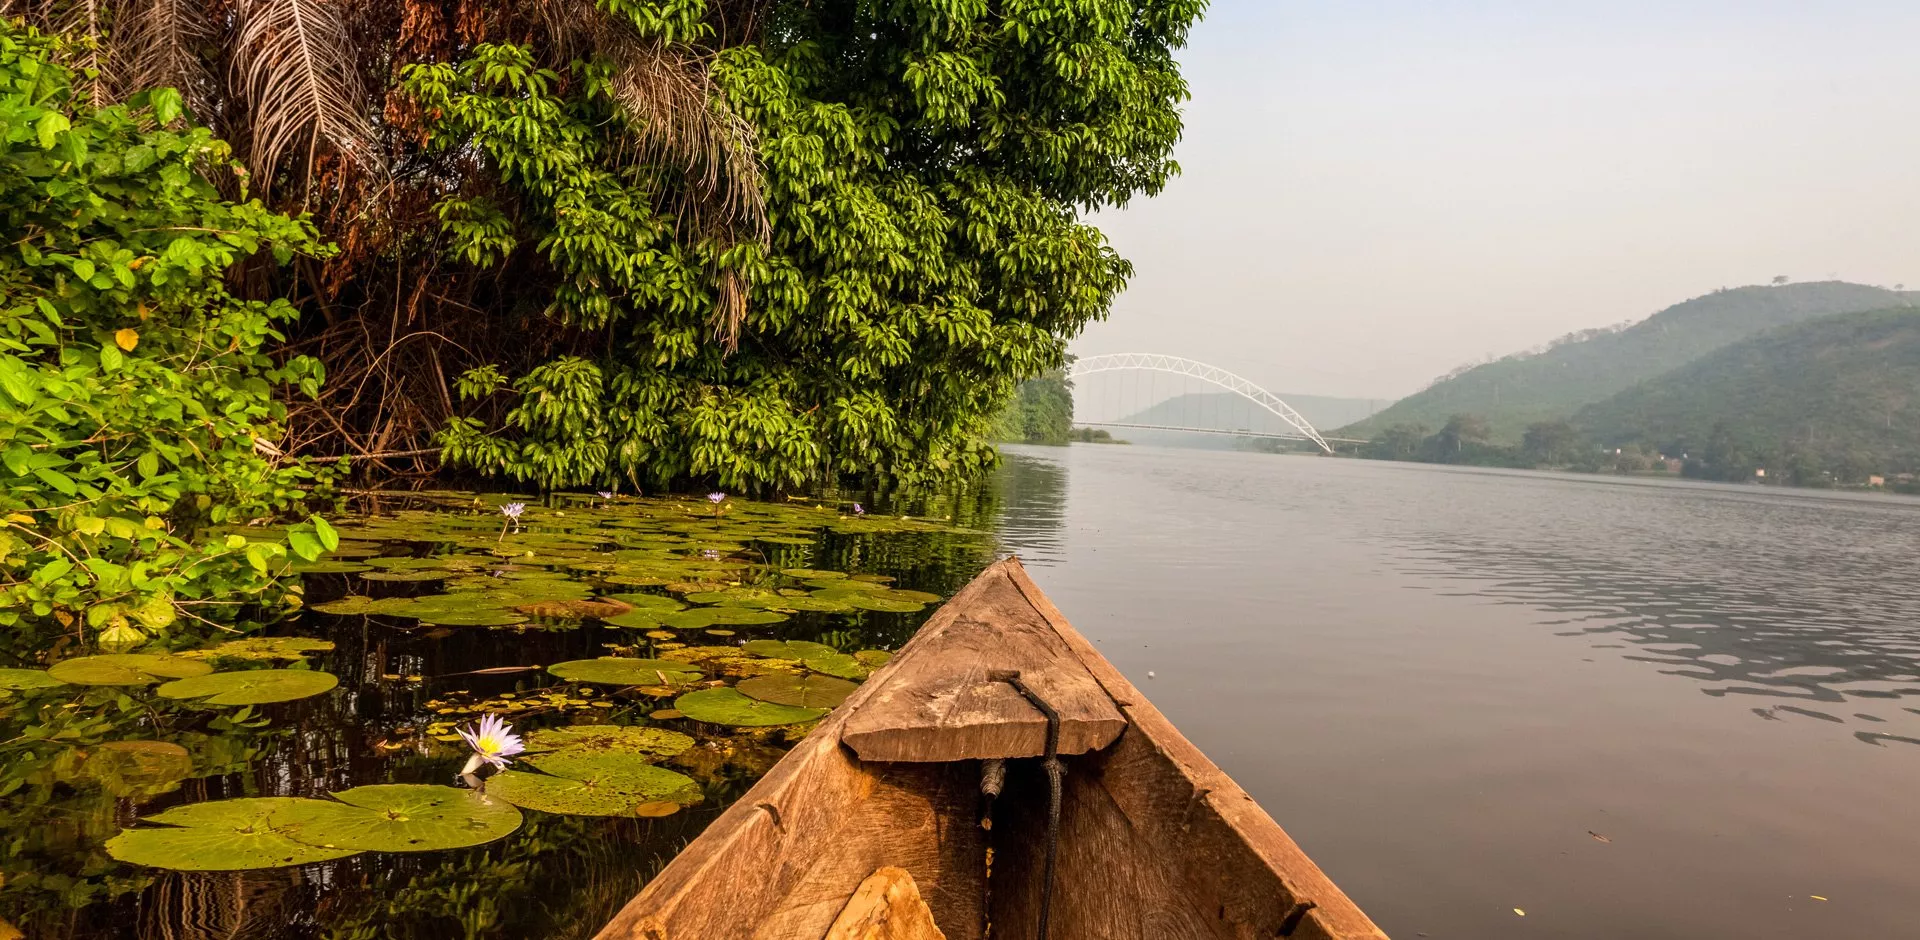 Lake Volta in Ghana, Africa | Lakes - Rated 3.3